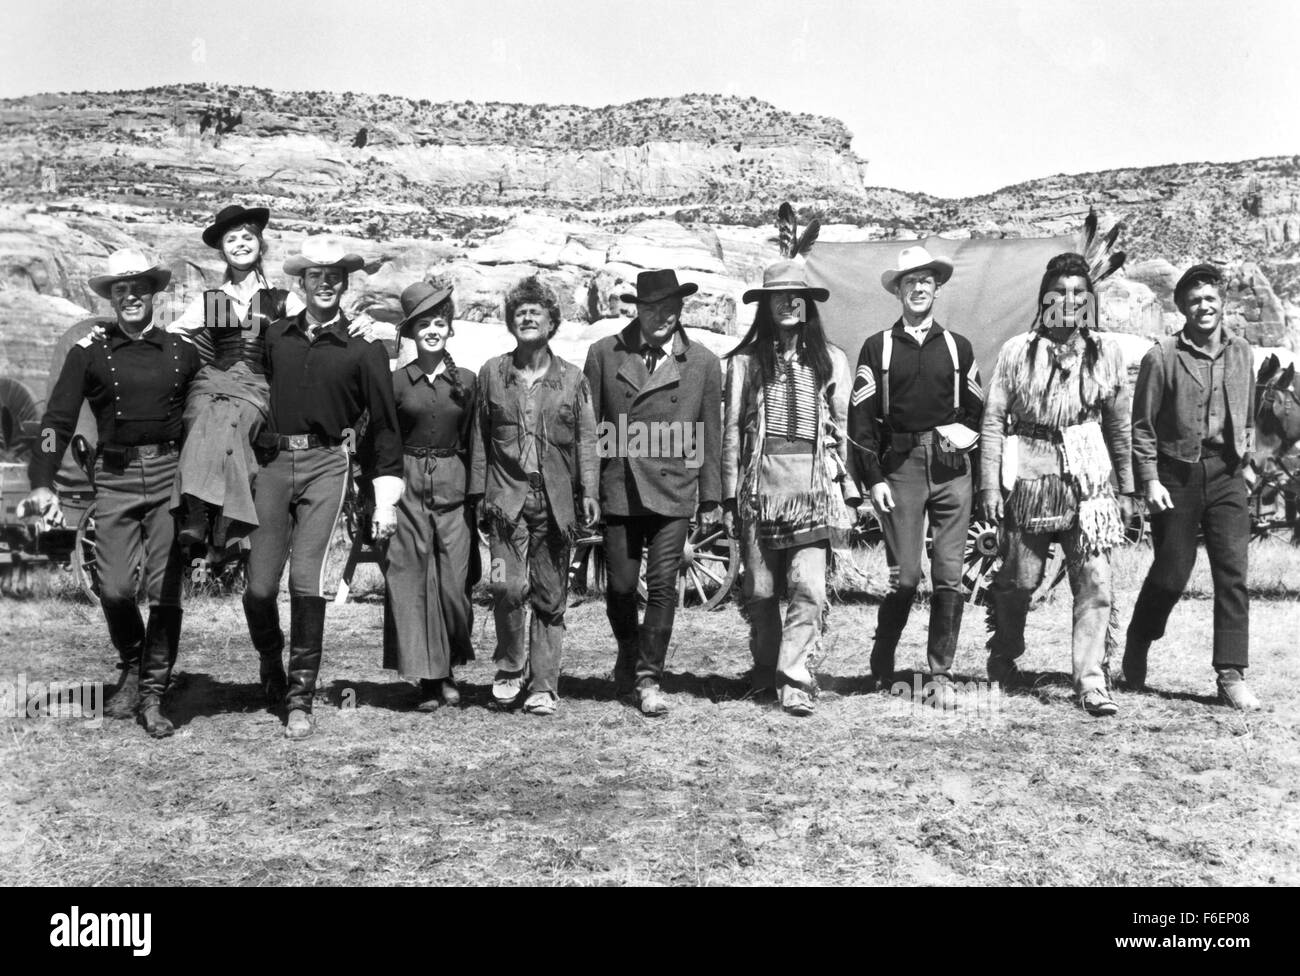 RELEASE DATE: June 23rd, 1965. MOVIE TITLE: The Hallelujah Trail. STUDIO: MGM. PLOT: A wagon train heads for Denver with a cargo of whisky for the miners. Chaos ensues as the Temperance League, the US cavalry, the miners and the local Indians all try to take control of the valuable cargo. PICTURED: Movie's cast. Stock Photo